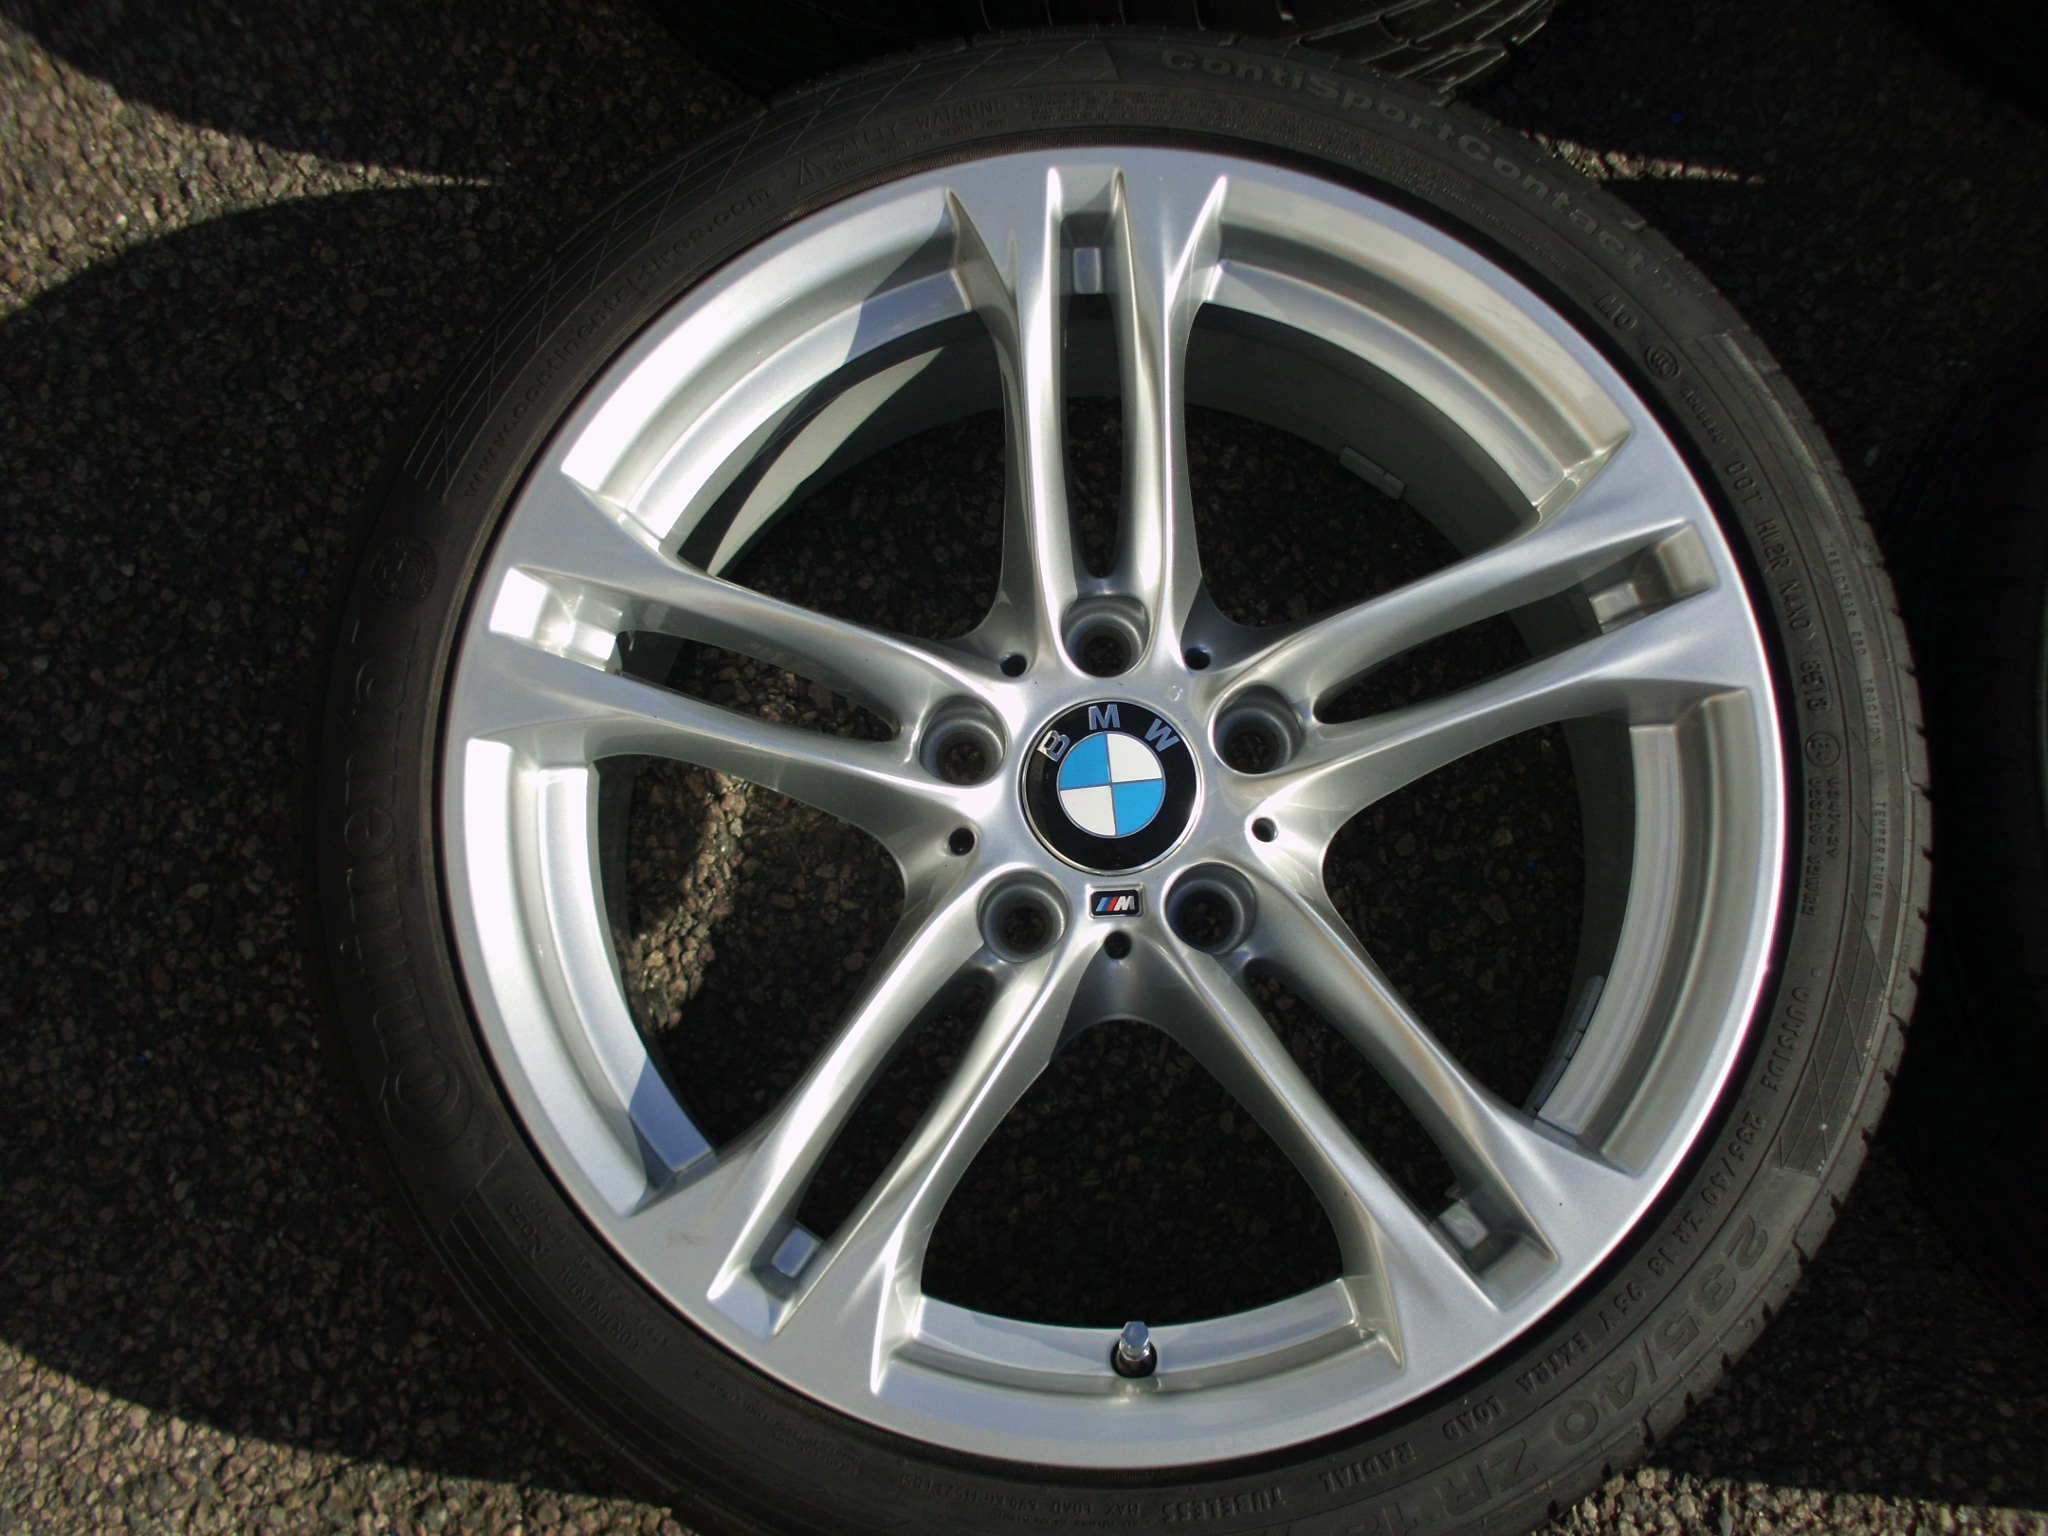 USED 18" GENUINE BMW STYLE 613 M SPORT ALLOY WHEELS,FULLY REFURBED INC GOOD NON RUNFLAT TYRES